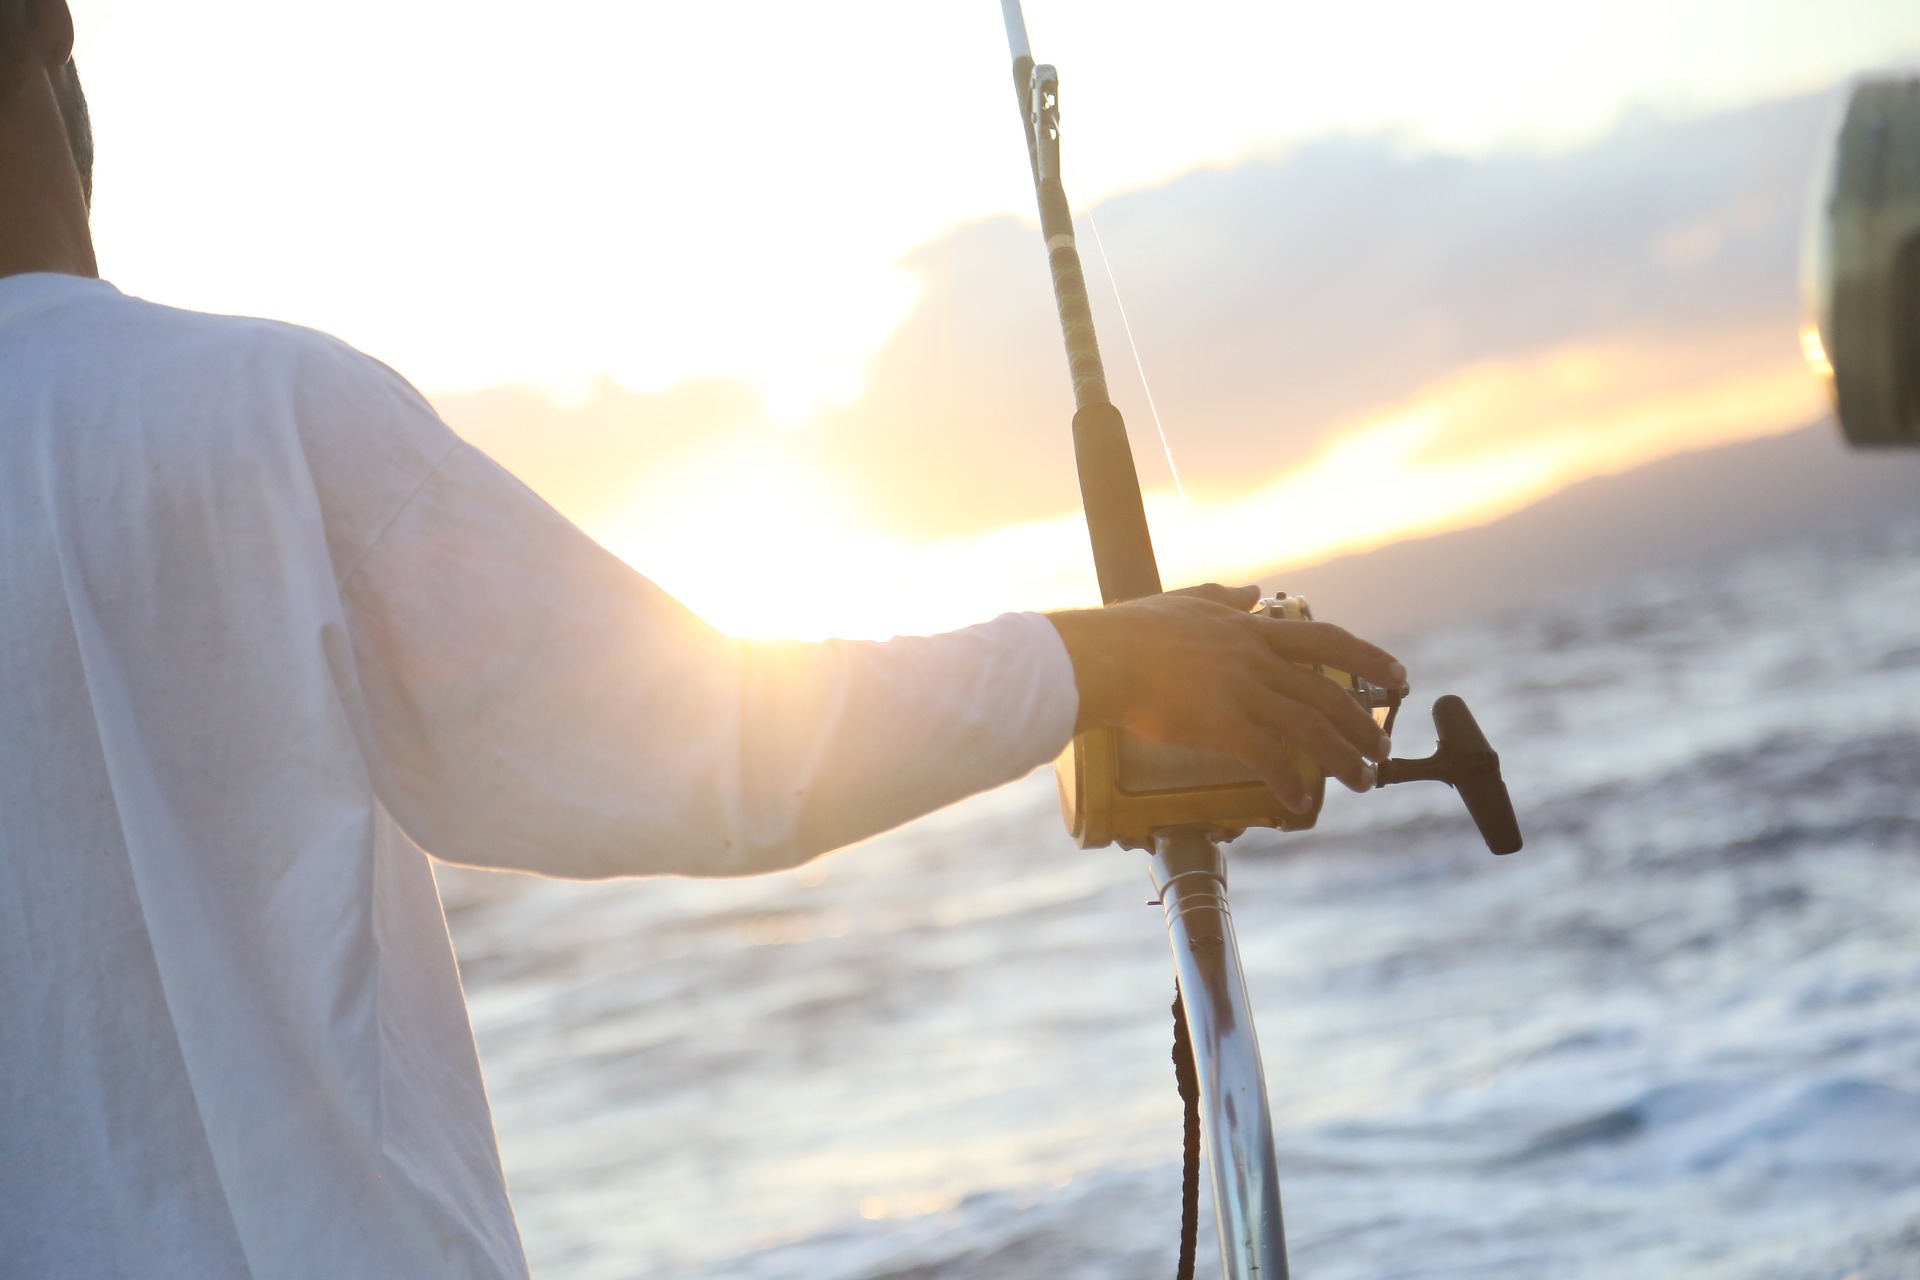 Keys to Offshore Fishing Success on the Troll